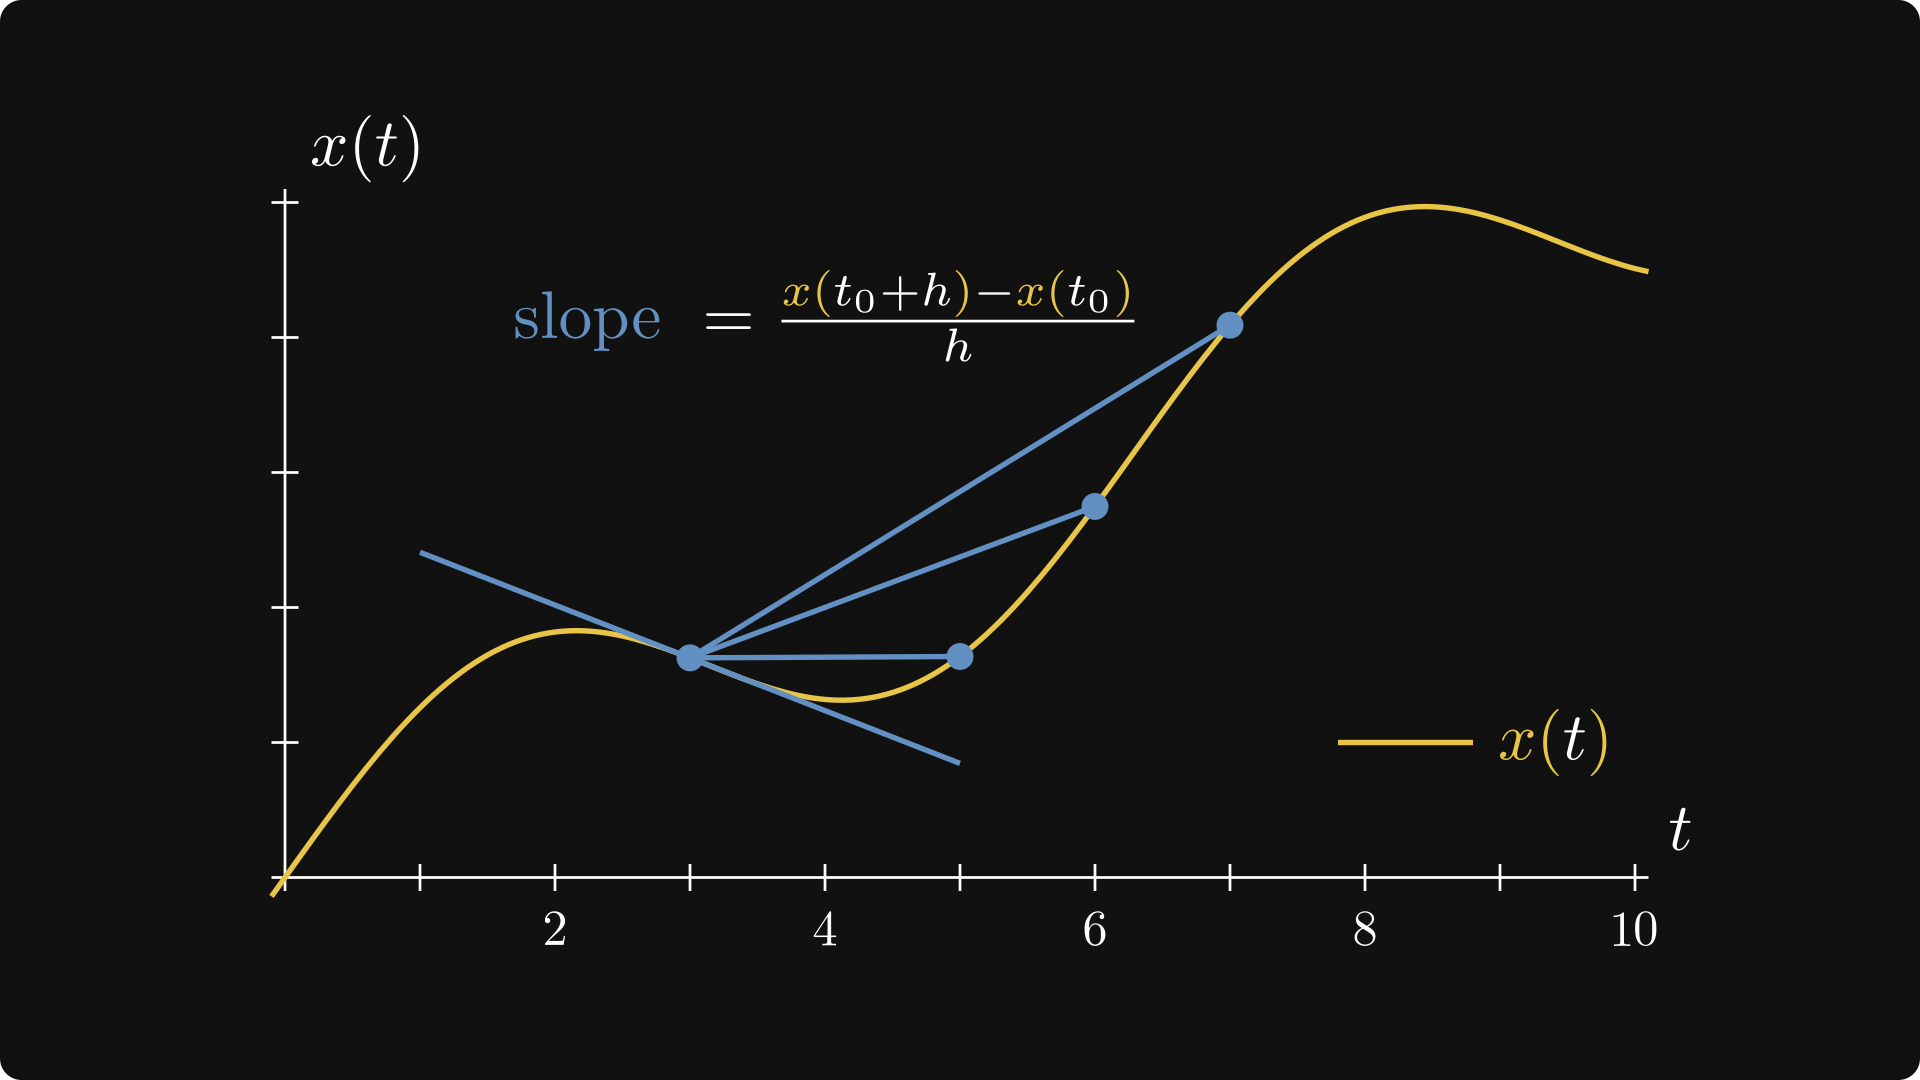 Derivative as the limit of slopes